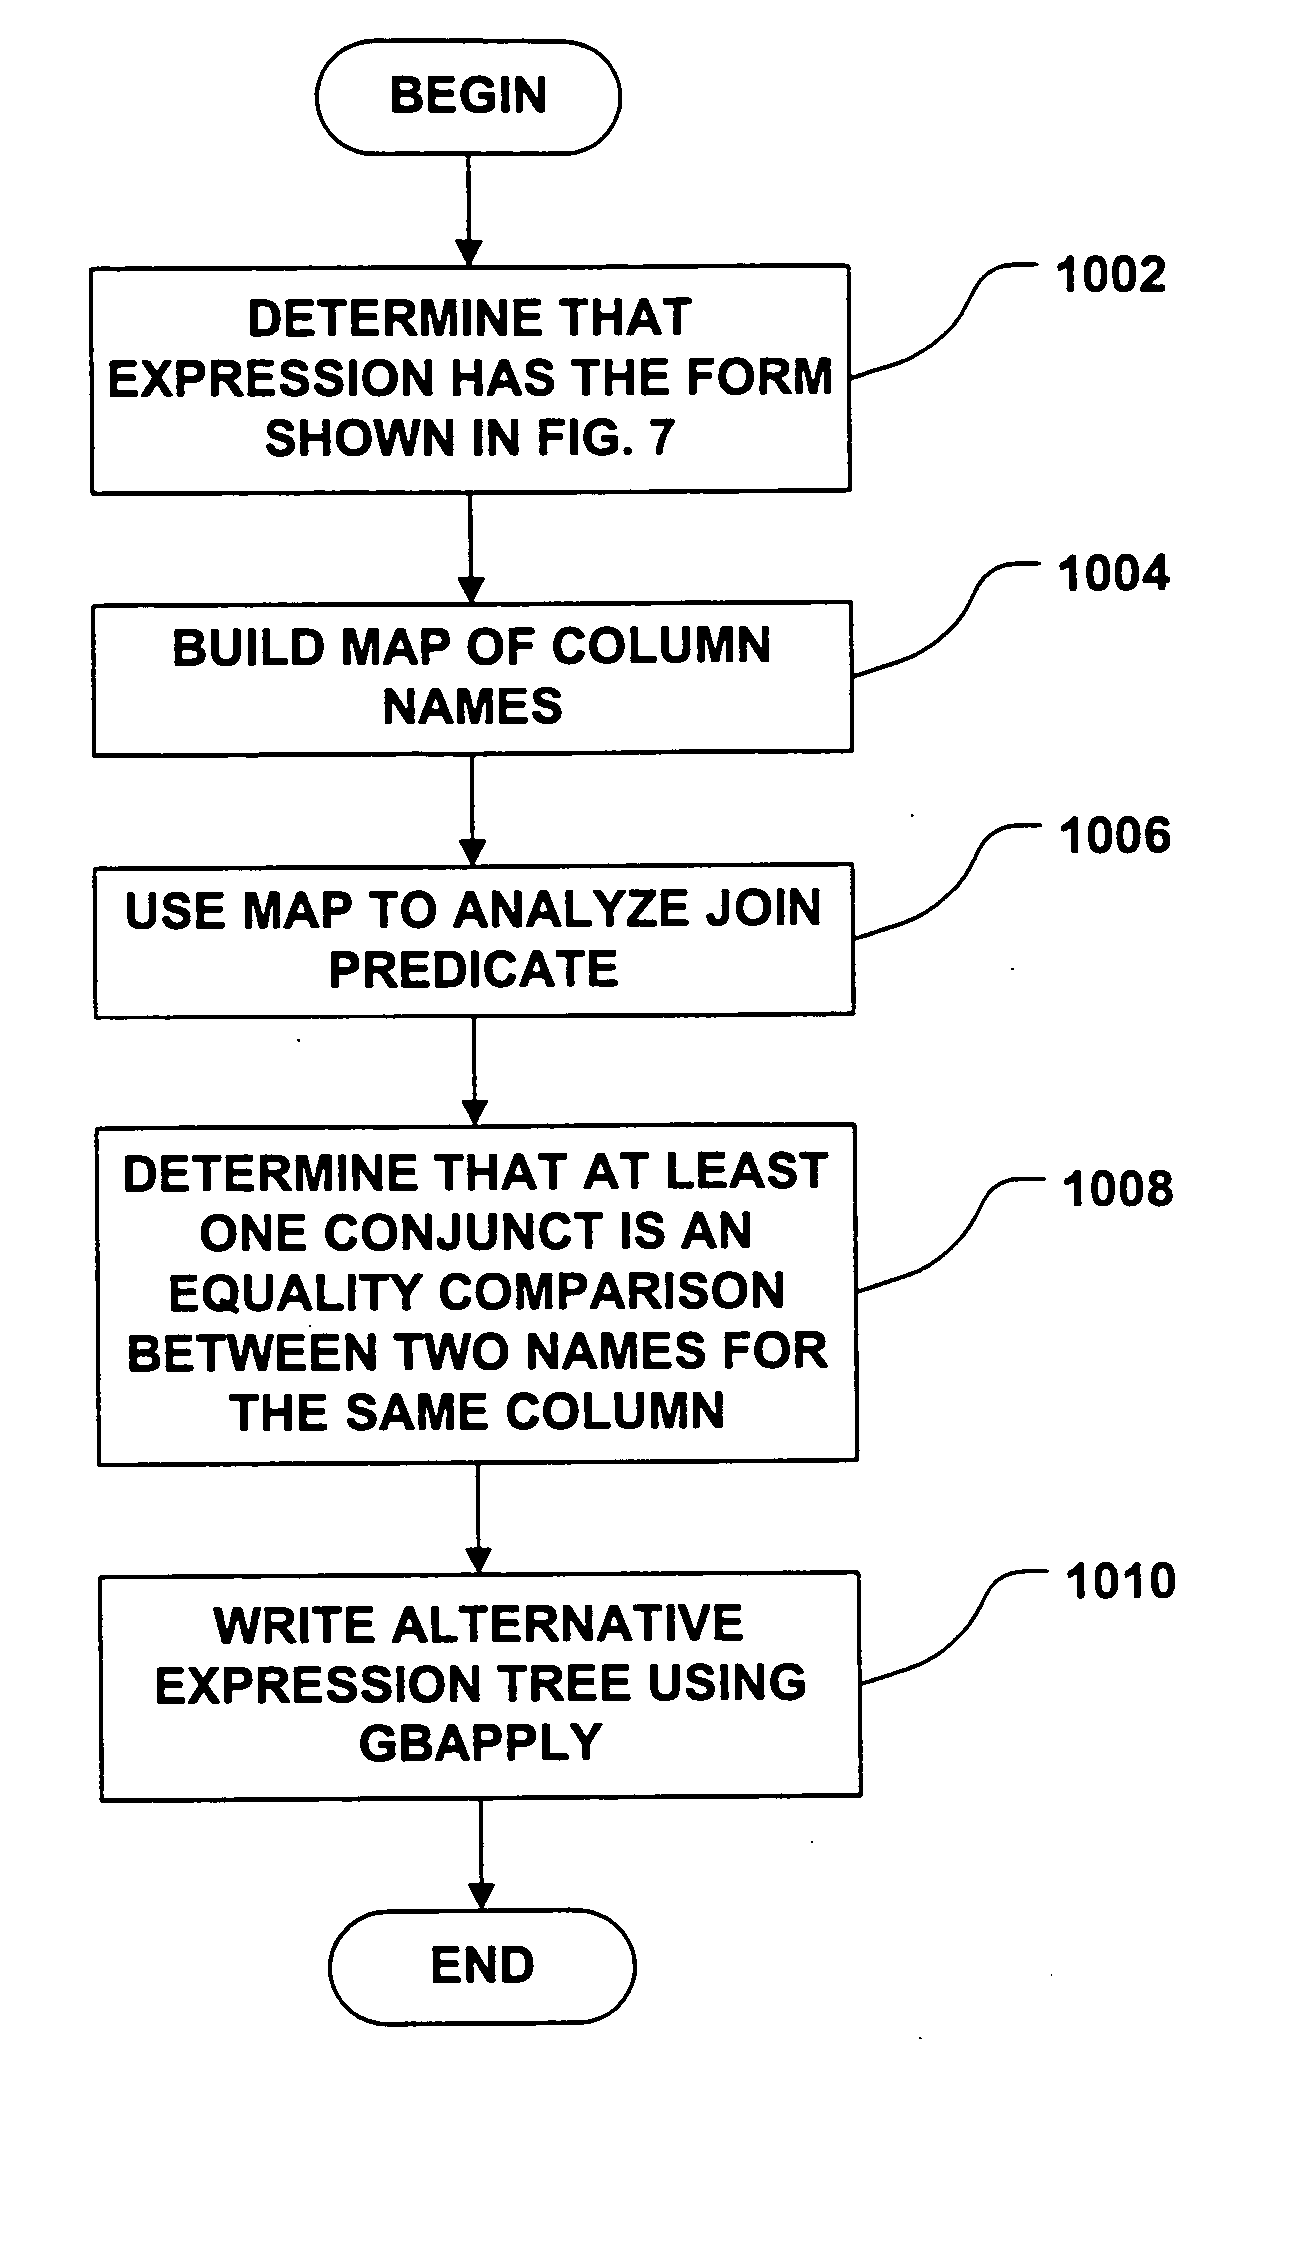 System and method for segmented evaluation of database queries